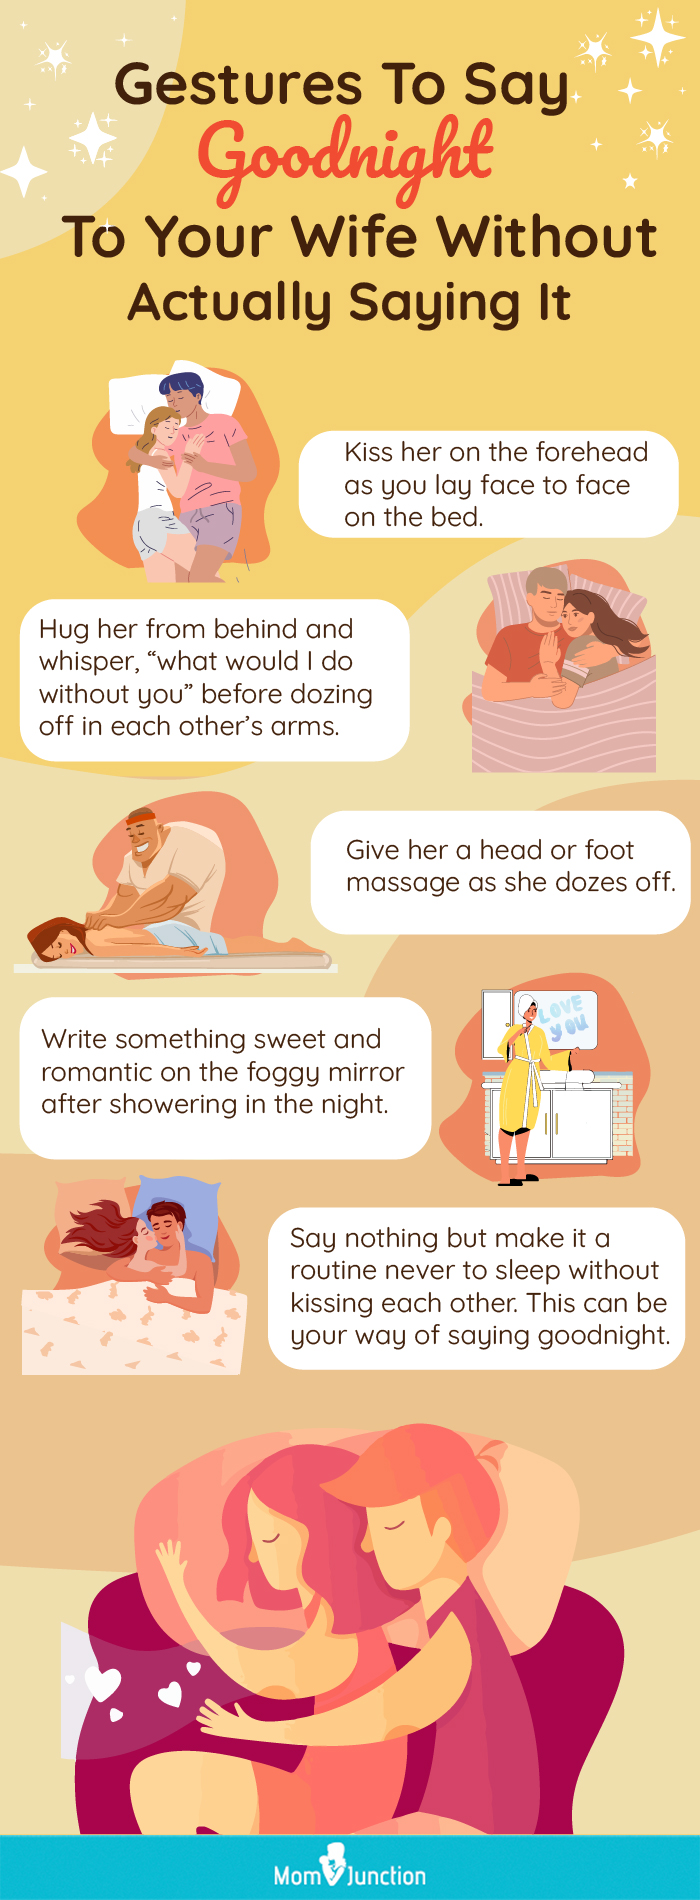 guestures to say goodnight without actuall saying it [infographic]